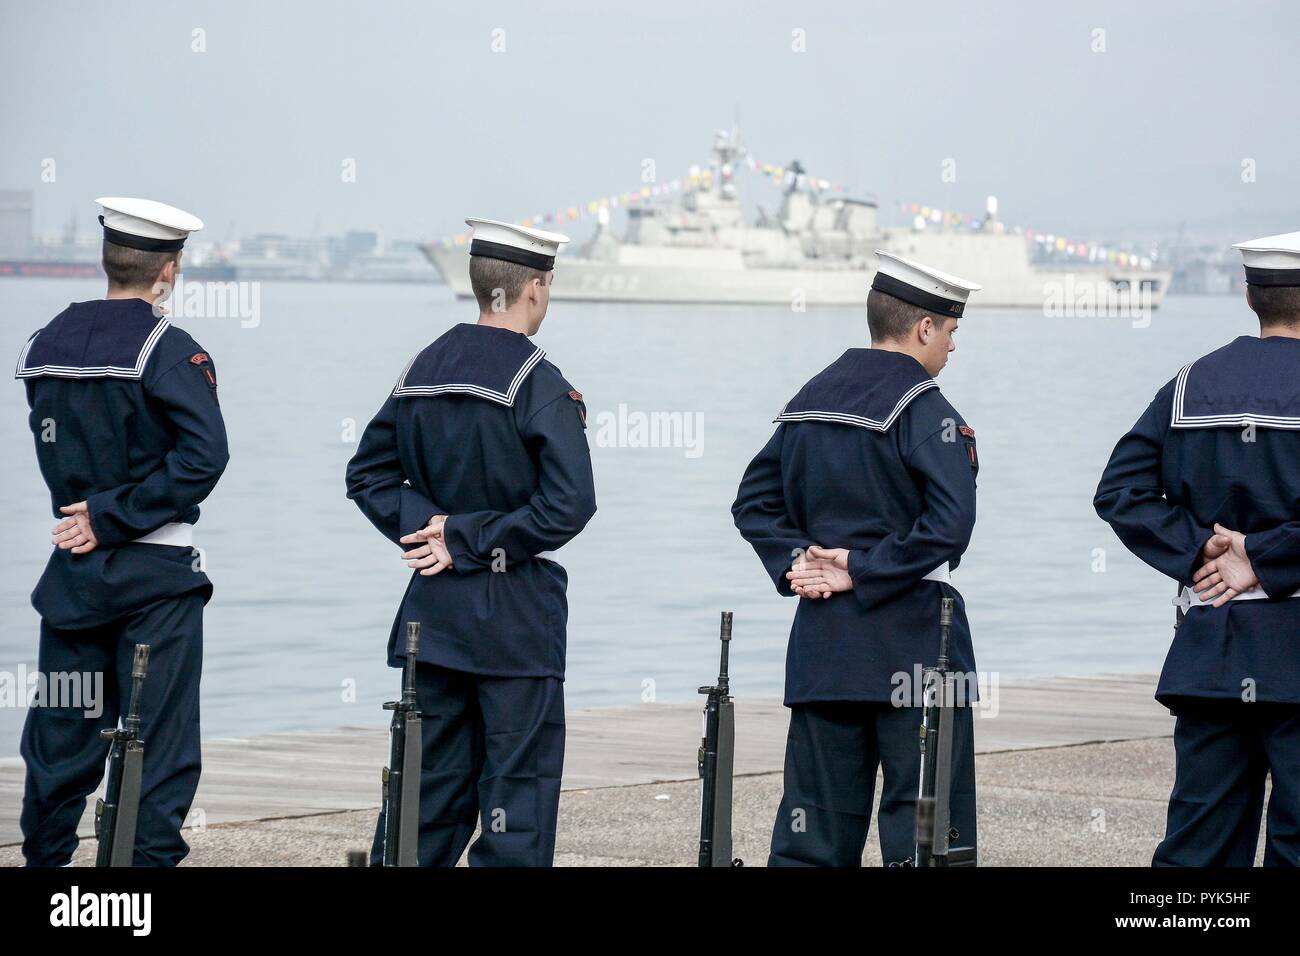 Thessaloniki, Greece. 28th Oct, 2018. Members of Greek Navy are seen preparing for the military parade of the WWII Anniversary of No.The Greek military prepares for the annual military parade for celebrating Greece's National 'Oxi' (No) Day, commemorating Greece's refusal to accept the ultimatum advanced by fascist Italy in 1940 during World War II. Credit: Giorgos Zachos/SOPA Images/ZUMA Wire/Alamy Live News Stock Photo